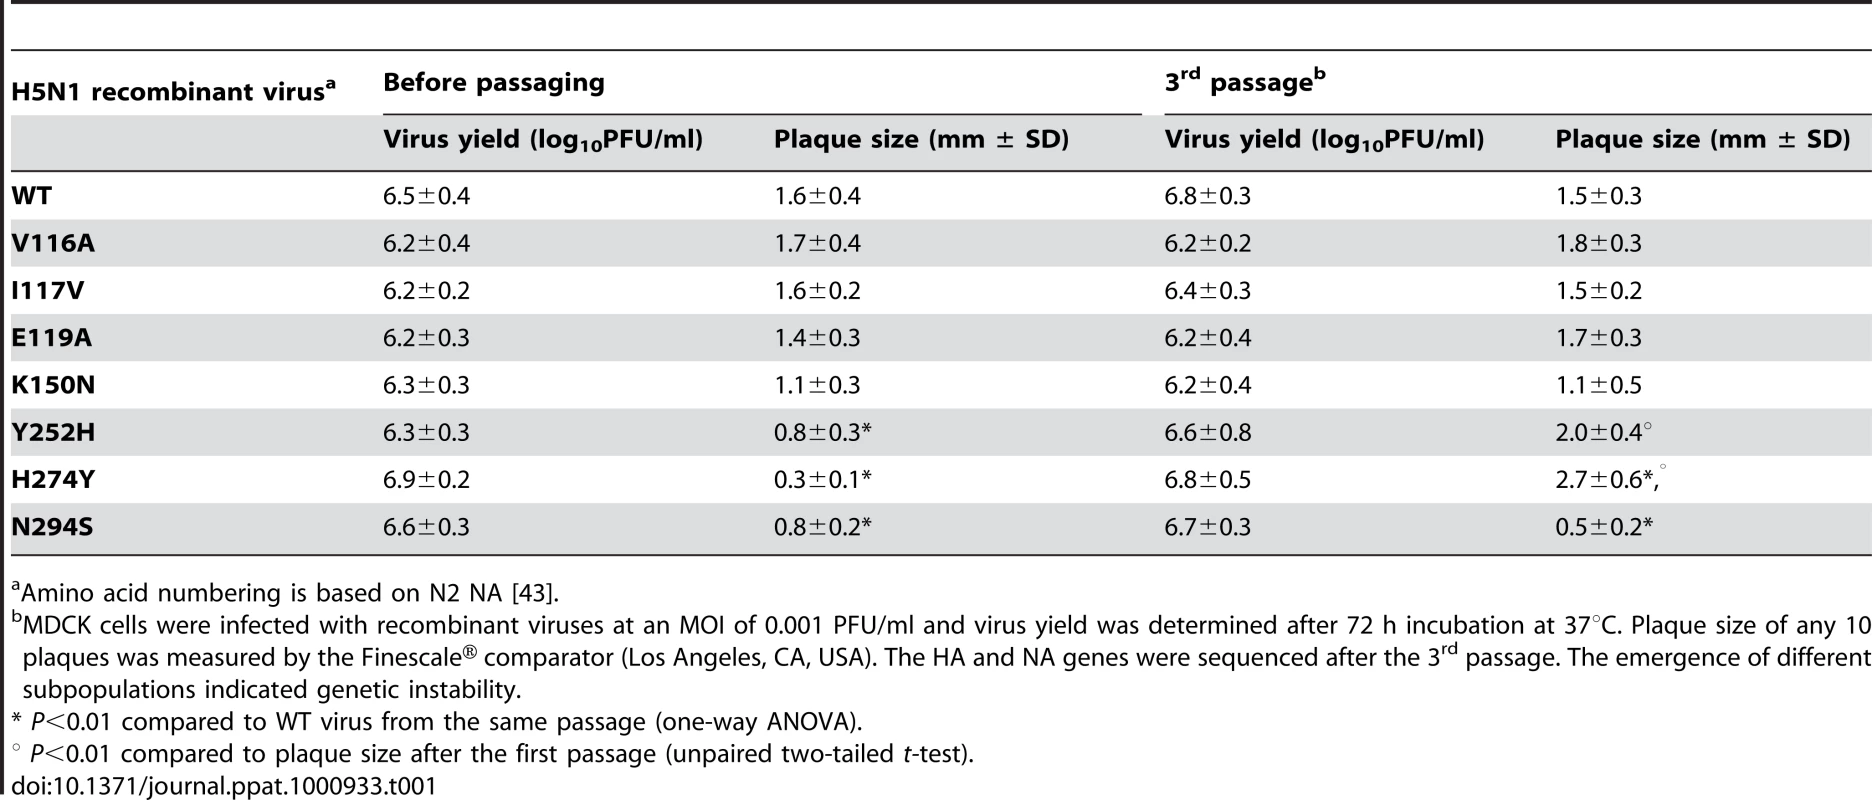 Growth of Recombinant H5N1 Influenza Viruses Before and After Passaging in MDCK Cells.